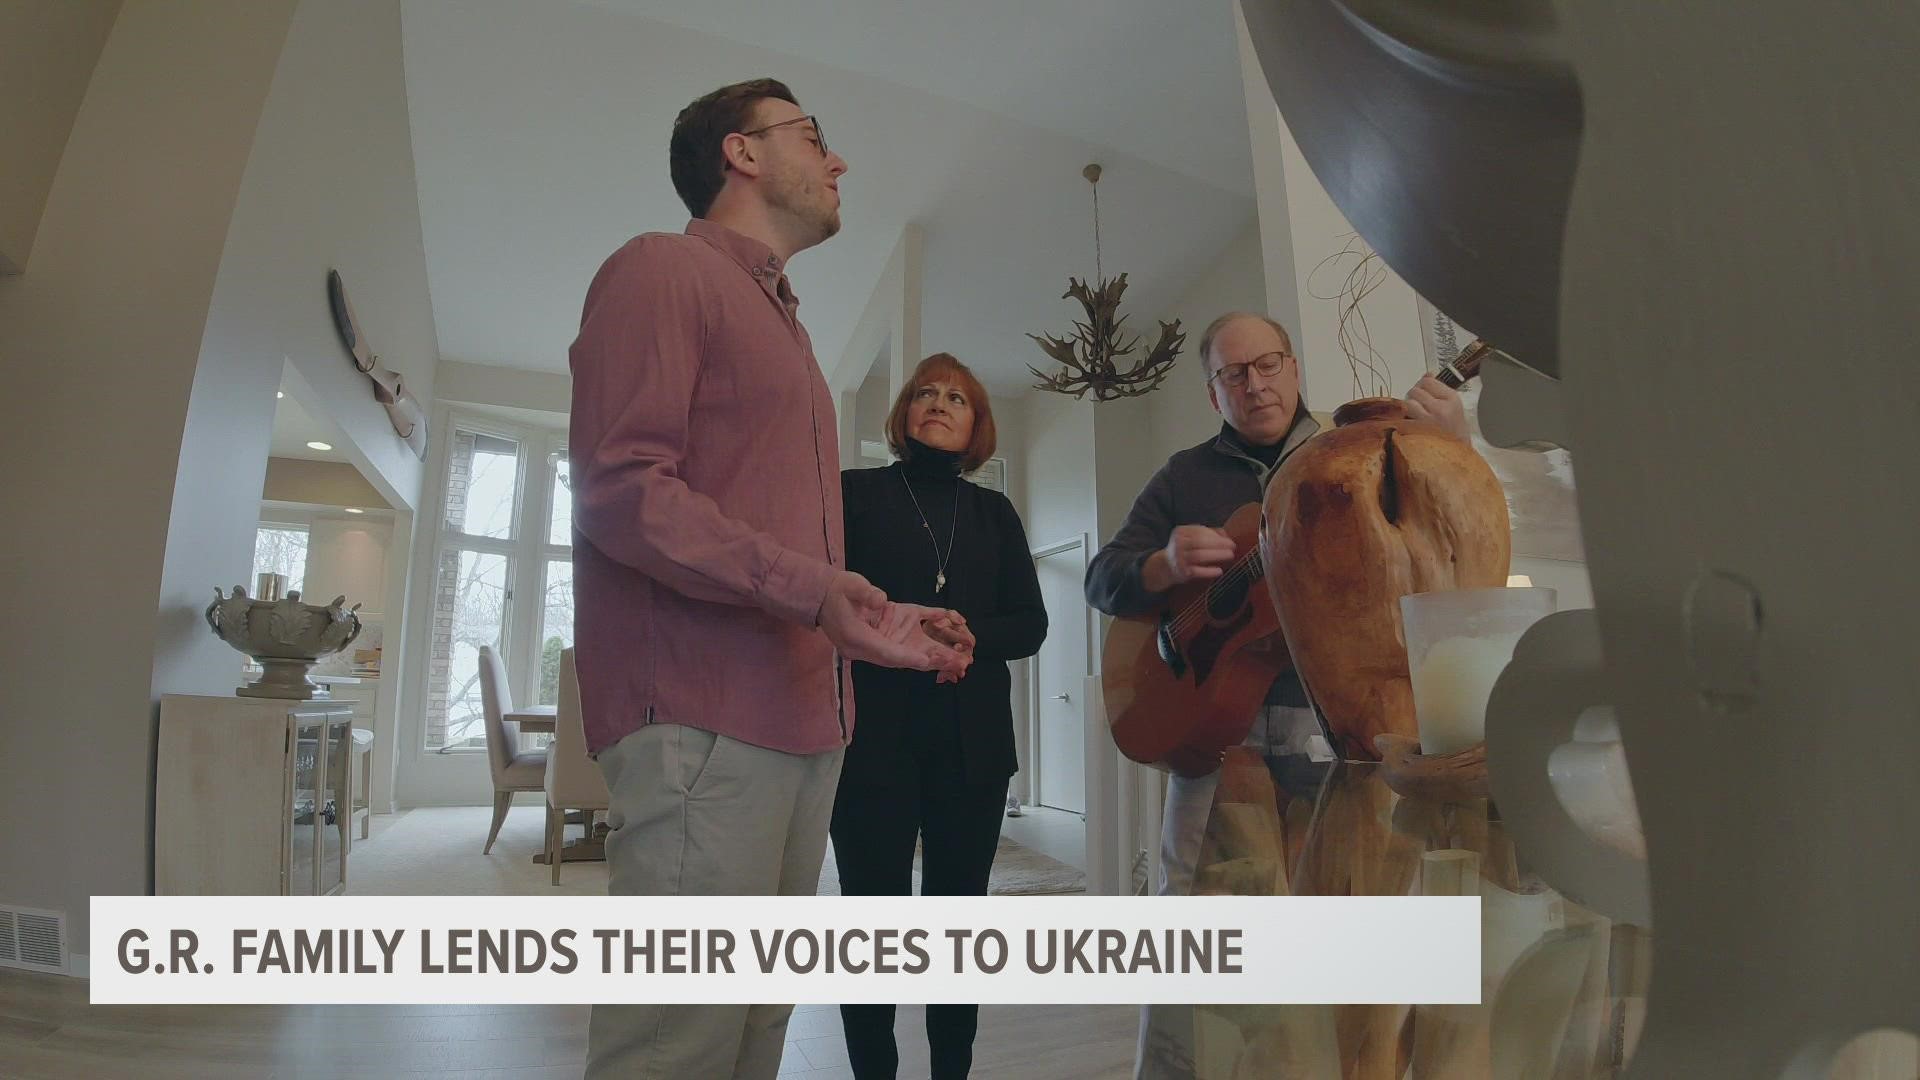 The Biggs Family Trio is part of a worldwide series of virtual performances designed to raise money for Ukrainian orphanages.